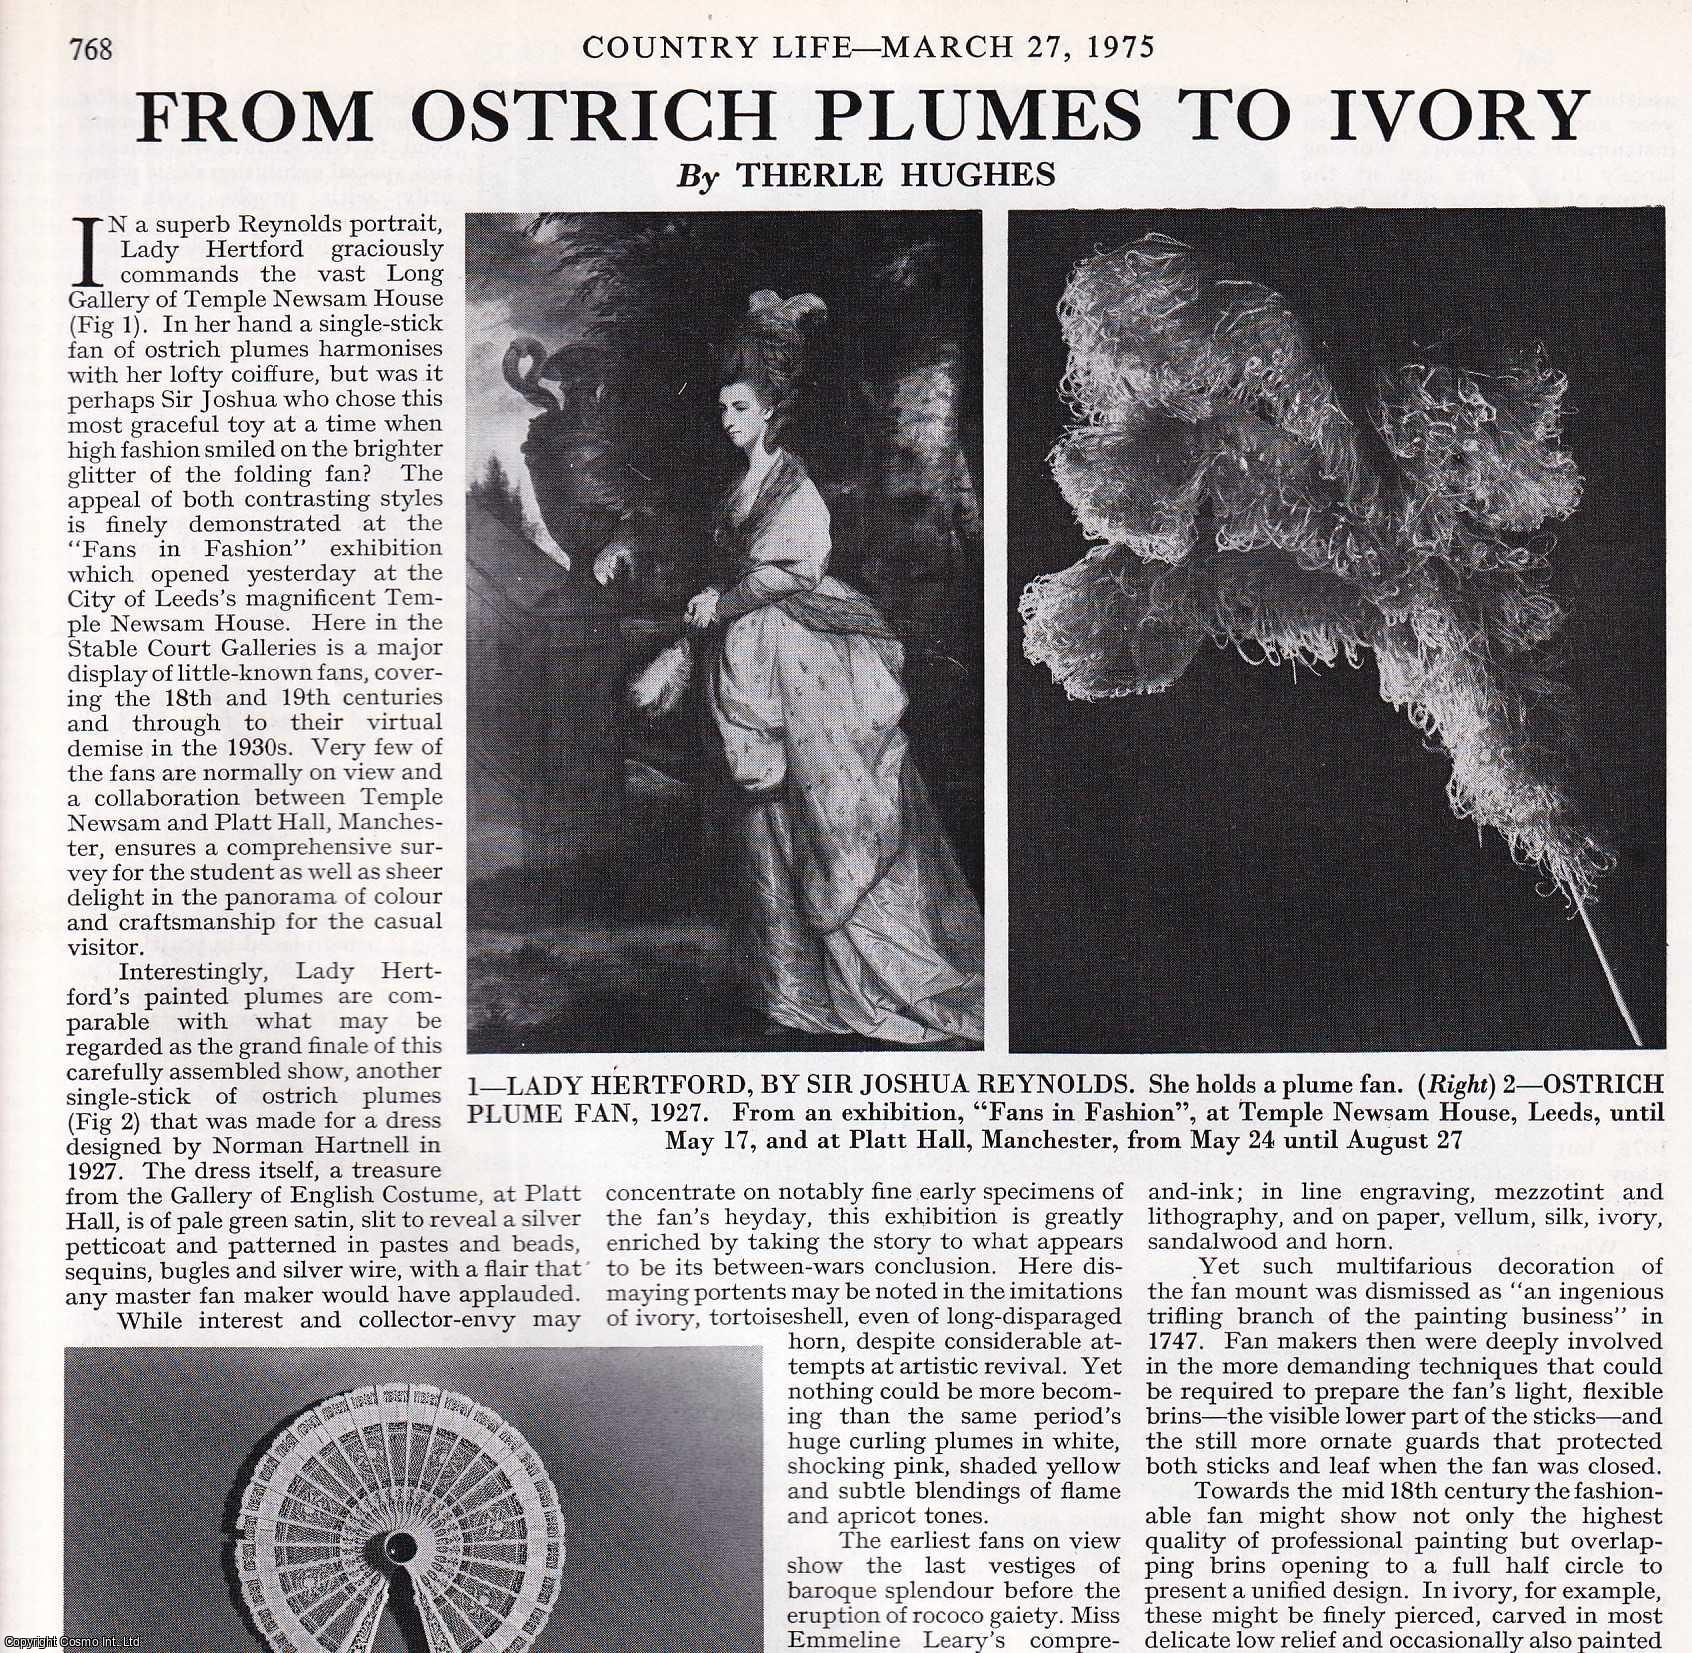 Therle Hughes - An Exhibition of 'Fans in Fashion': From Ostrich Plumes to Ivory. Several pictures and accompanying text, removed from an original issue of Country Life Magazine, 1975.